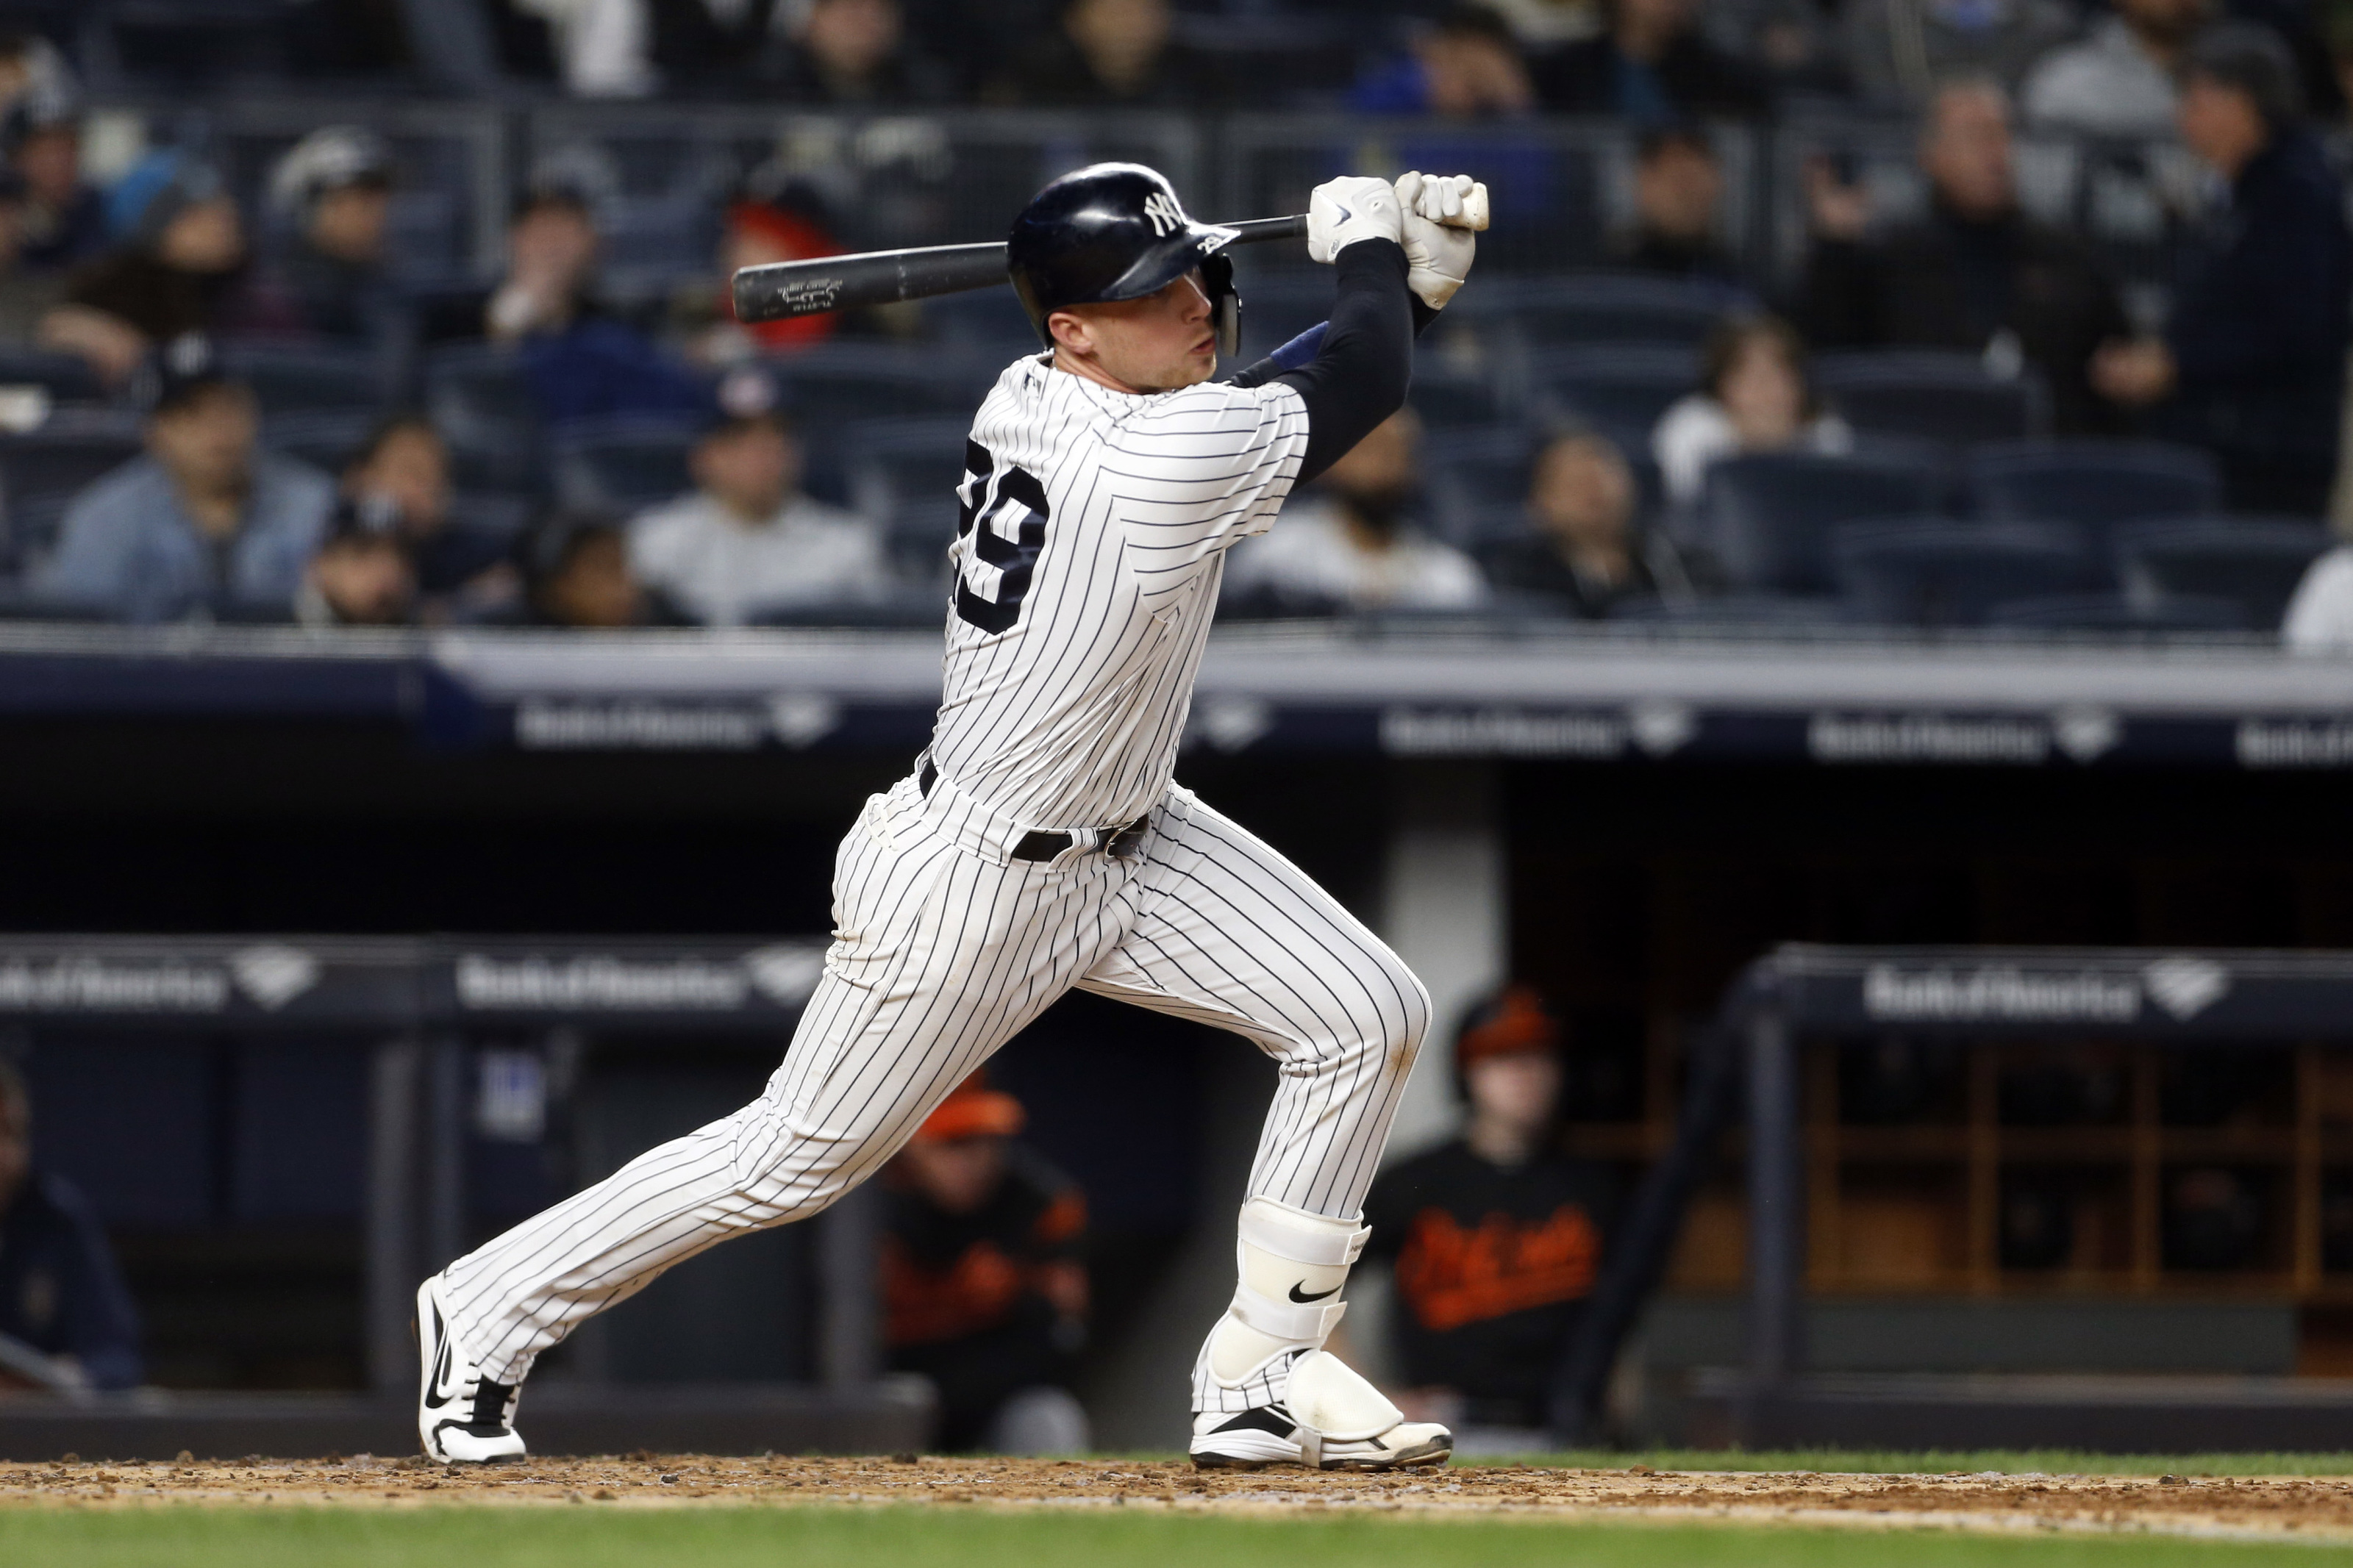 NY Yankees: Brandon Drury arrives at spring training, ready to win now